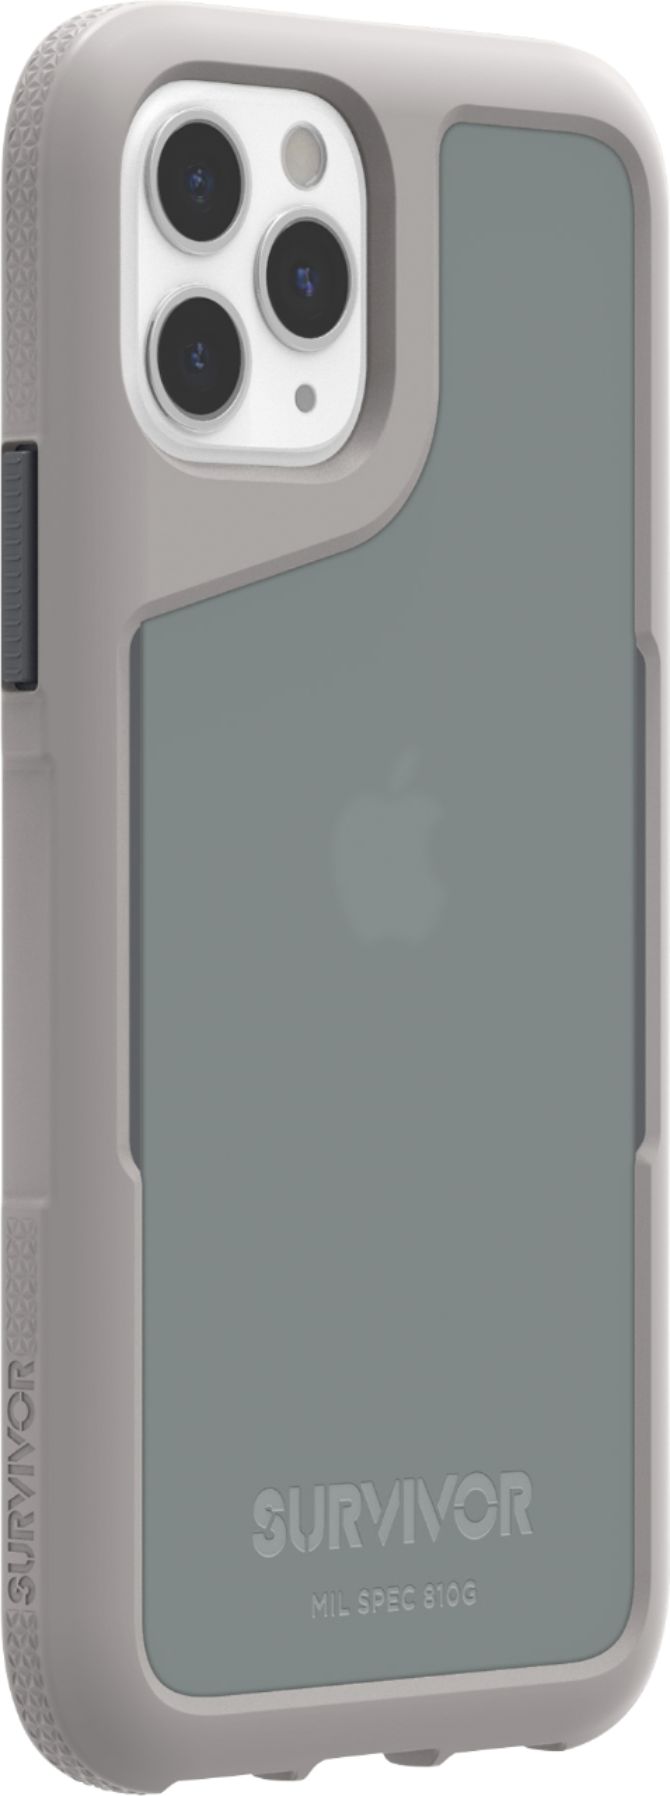 Angle View: Griffin Technology - Survivor Endurance Case for Apple® iPhone® 11 Pro - Gray/Translucent